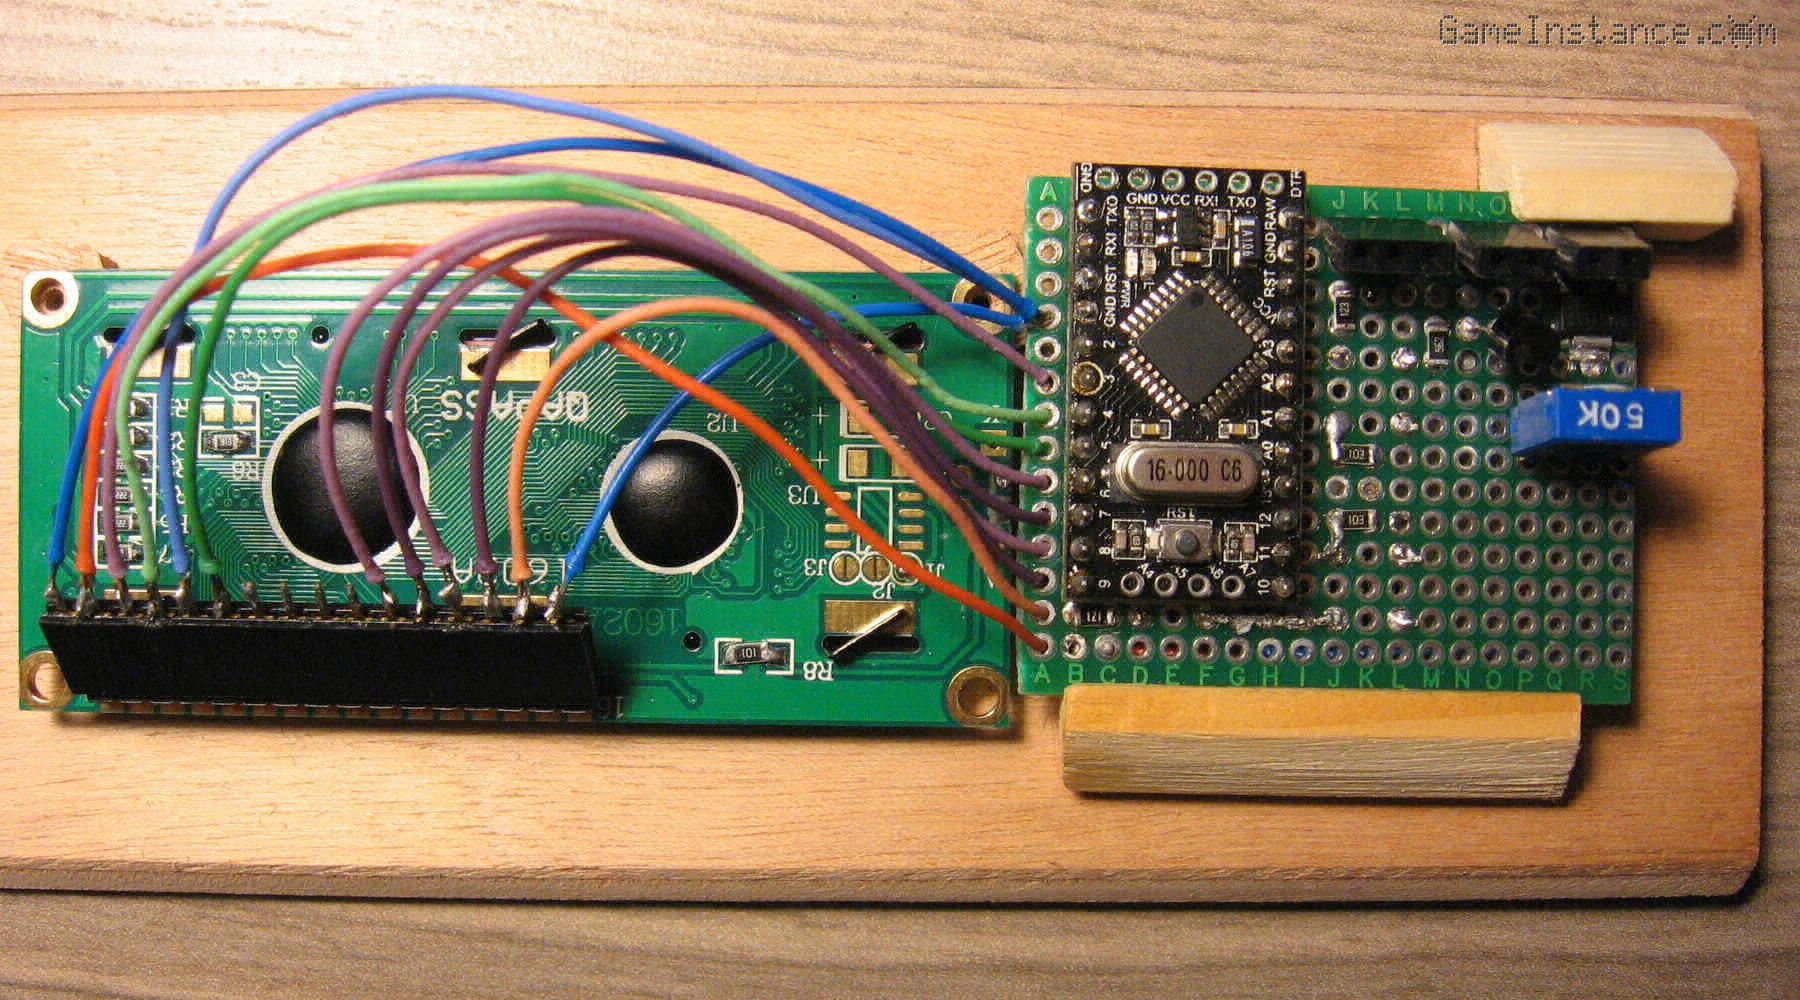 UV-Box 400 - Back side of the front panel. The PCB and LCD in place.